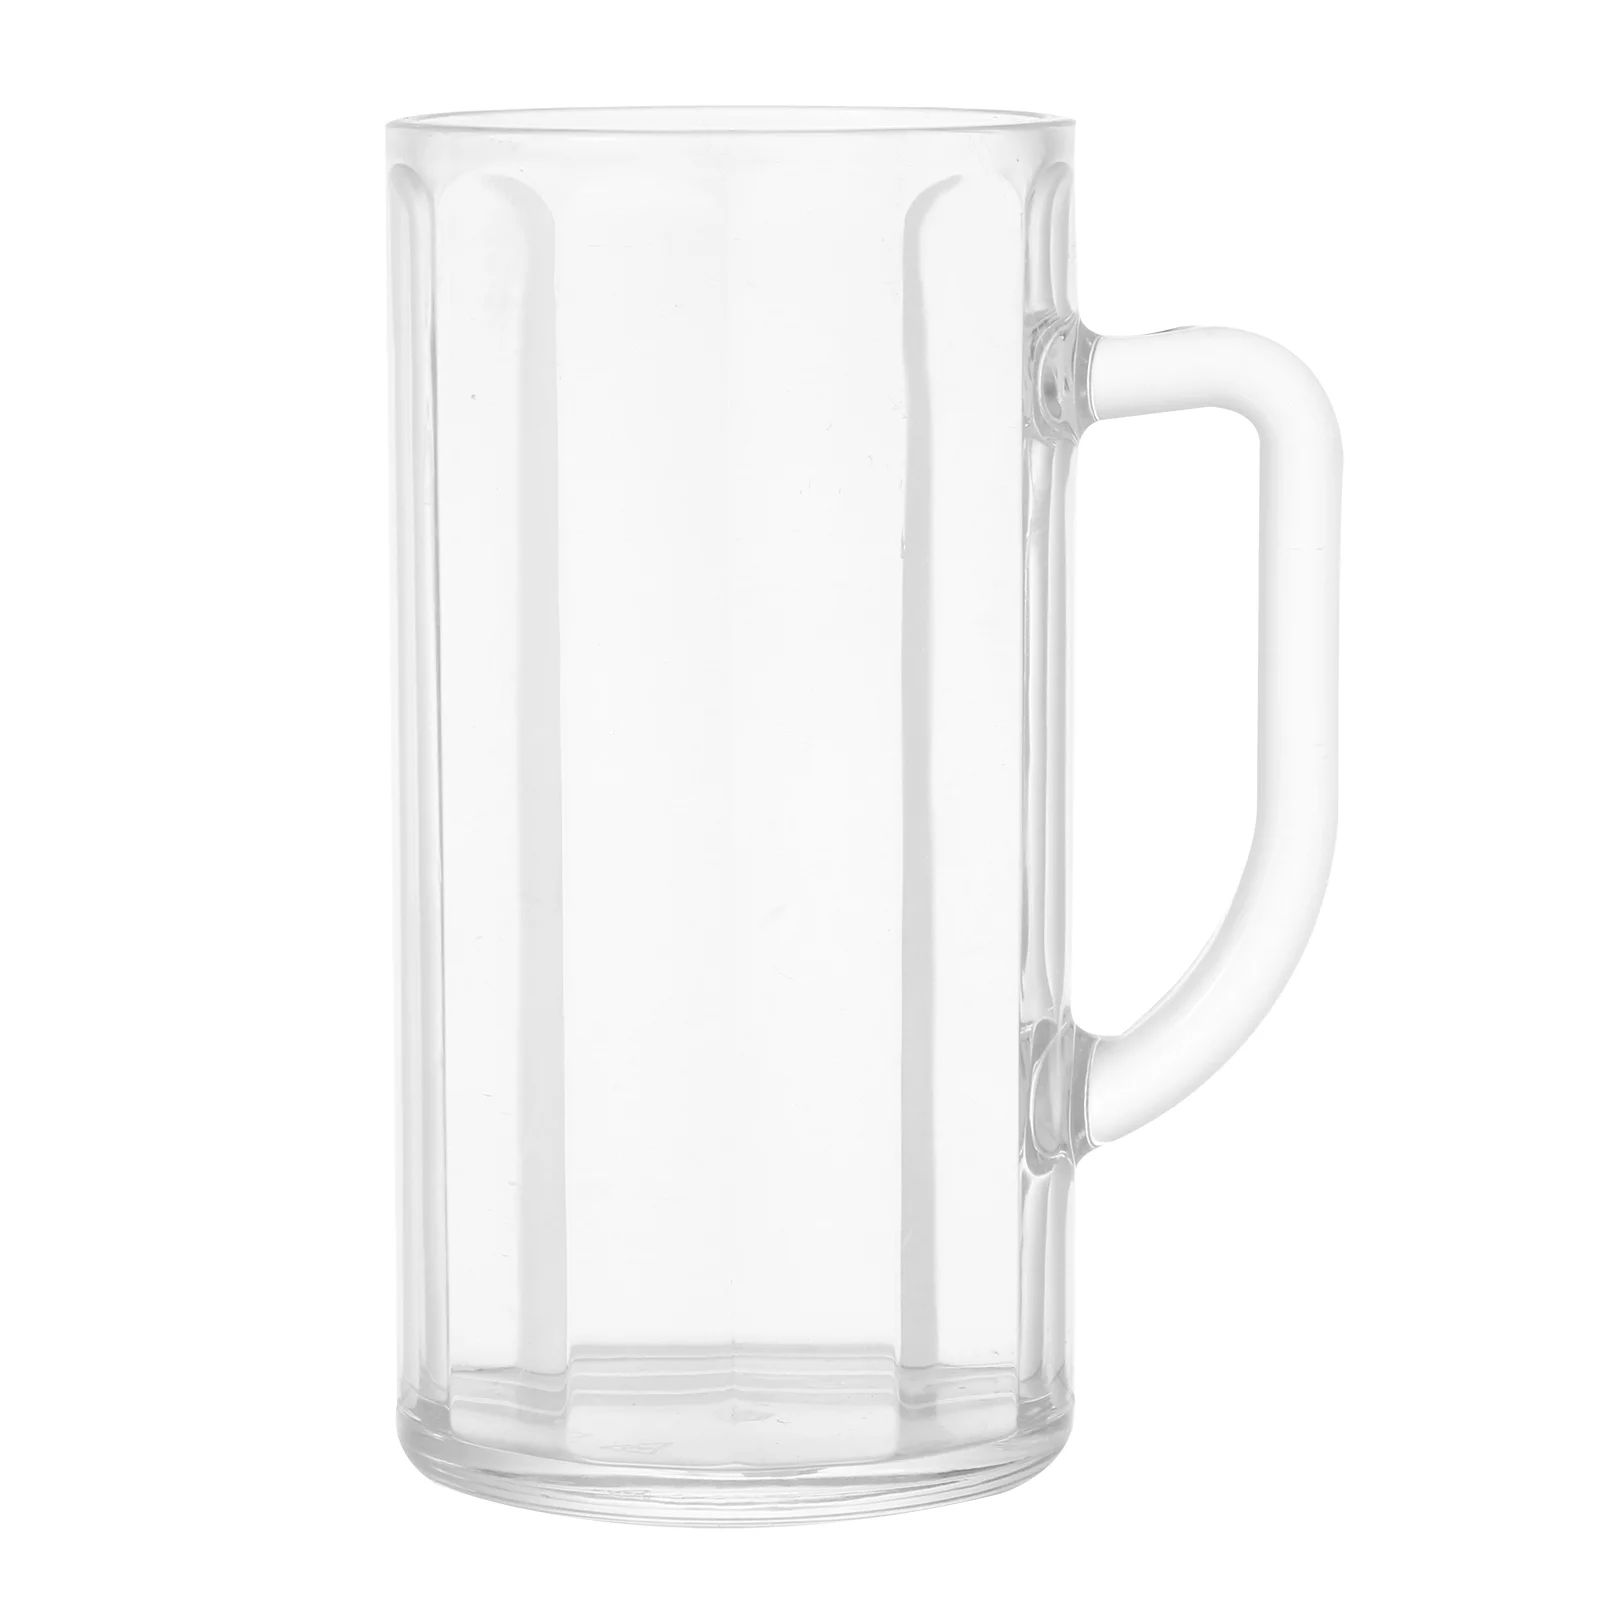 530ml Plastic Clear Water Mug Beer Cup Home Bar Party Drinking Cup with Handle | Walmart (US)